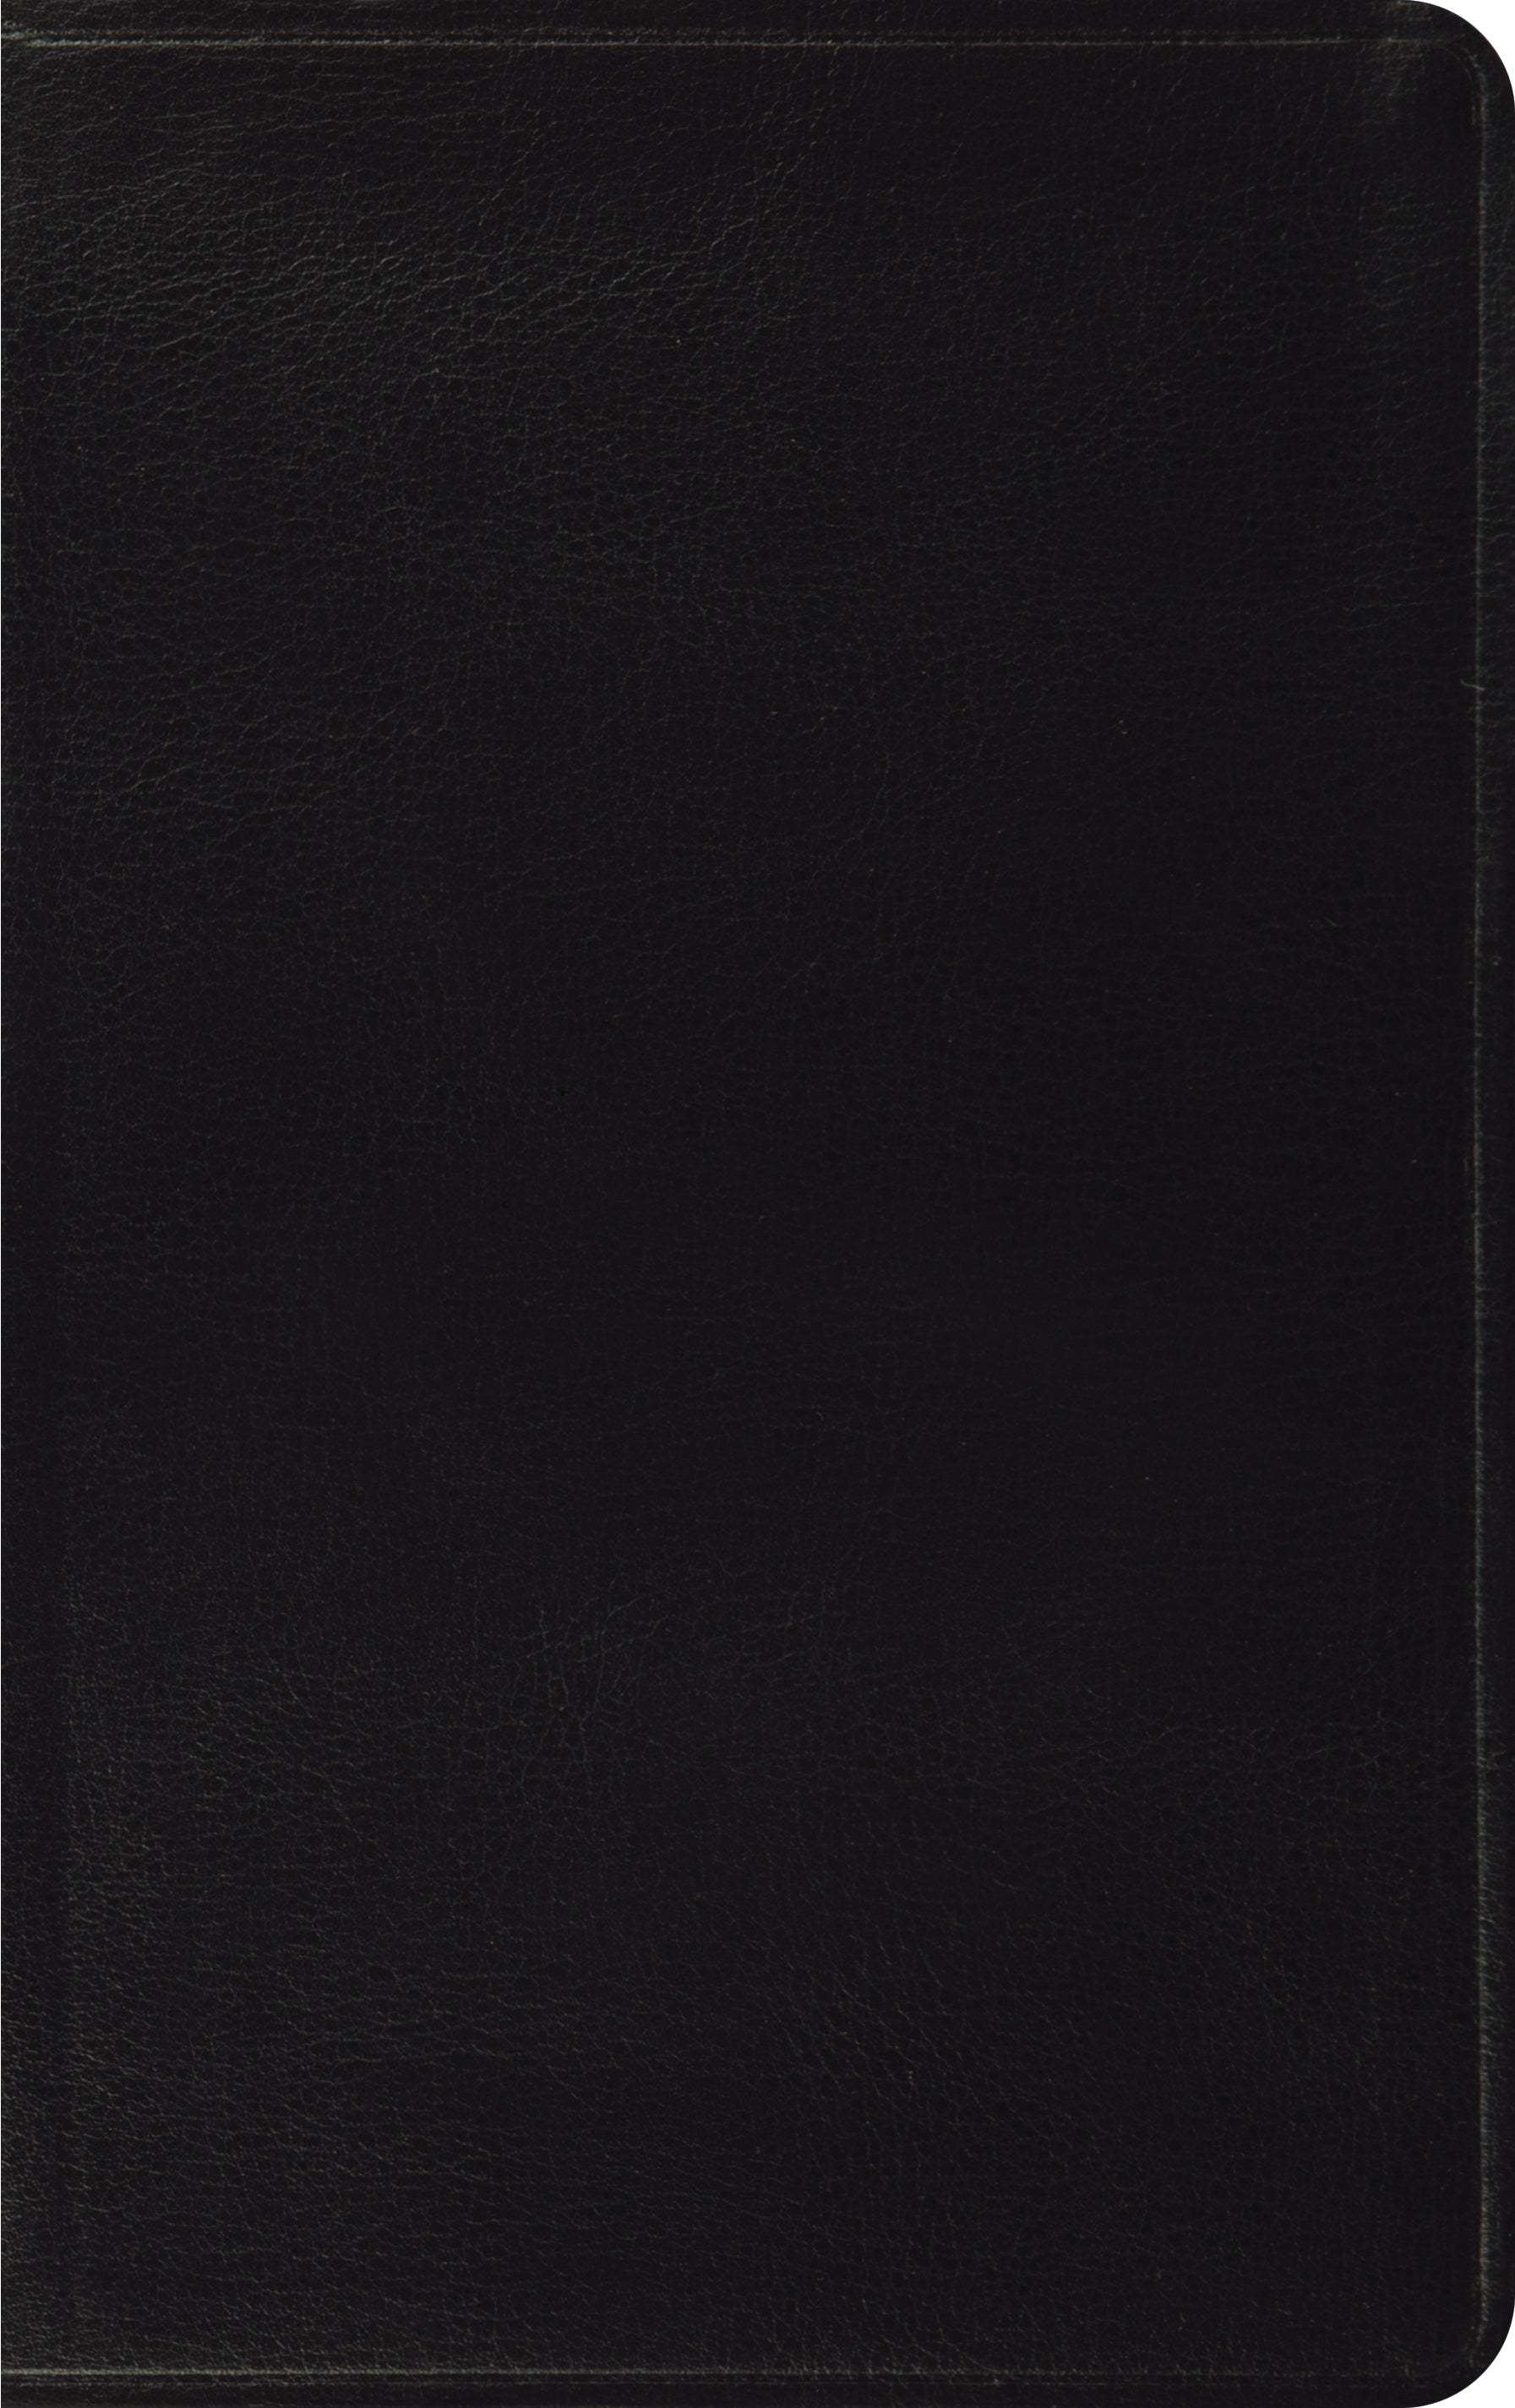 Image of ESV Thinline Bible, Black, Bonded Leather, Two-Column Format, Concordance, Words of Jesus in Red Text, Presentation Pages, Ribbon Marker, Gold Page Edging other